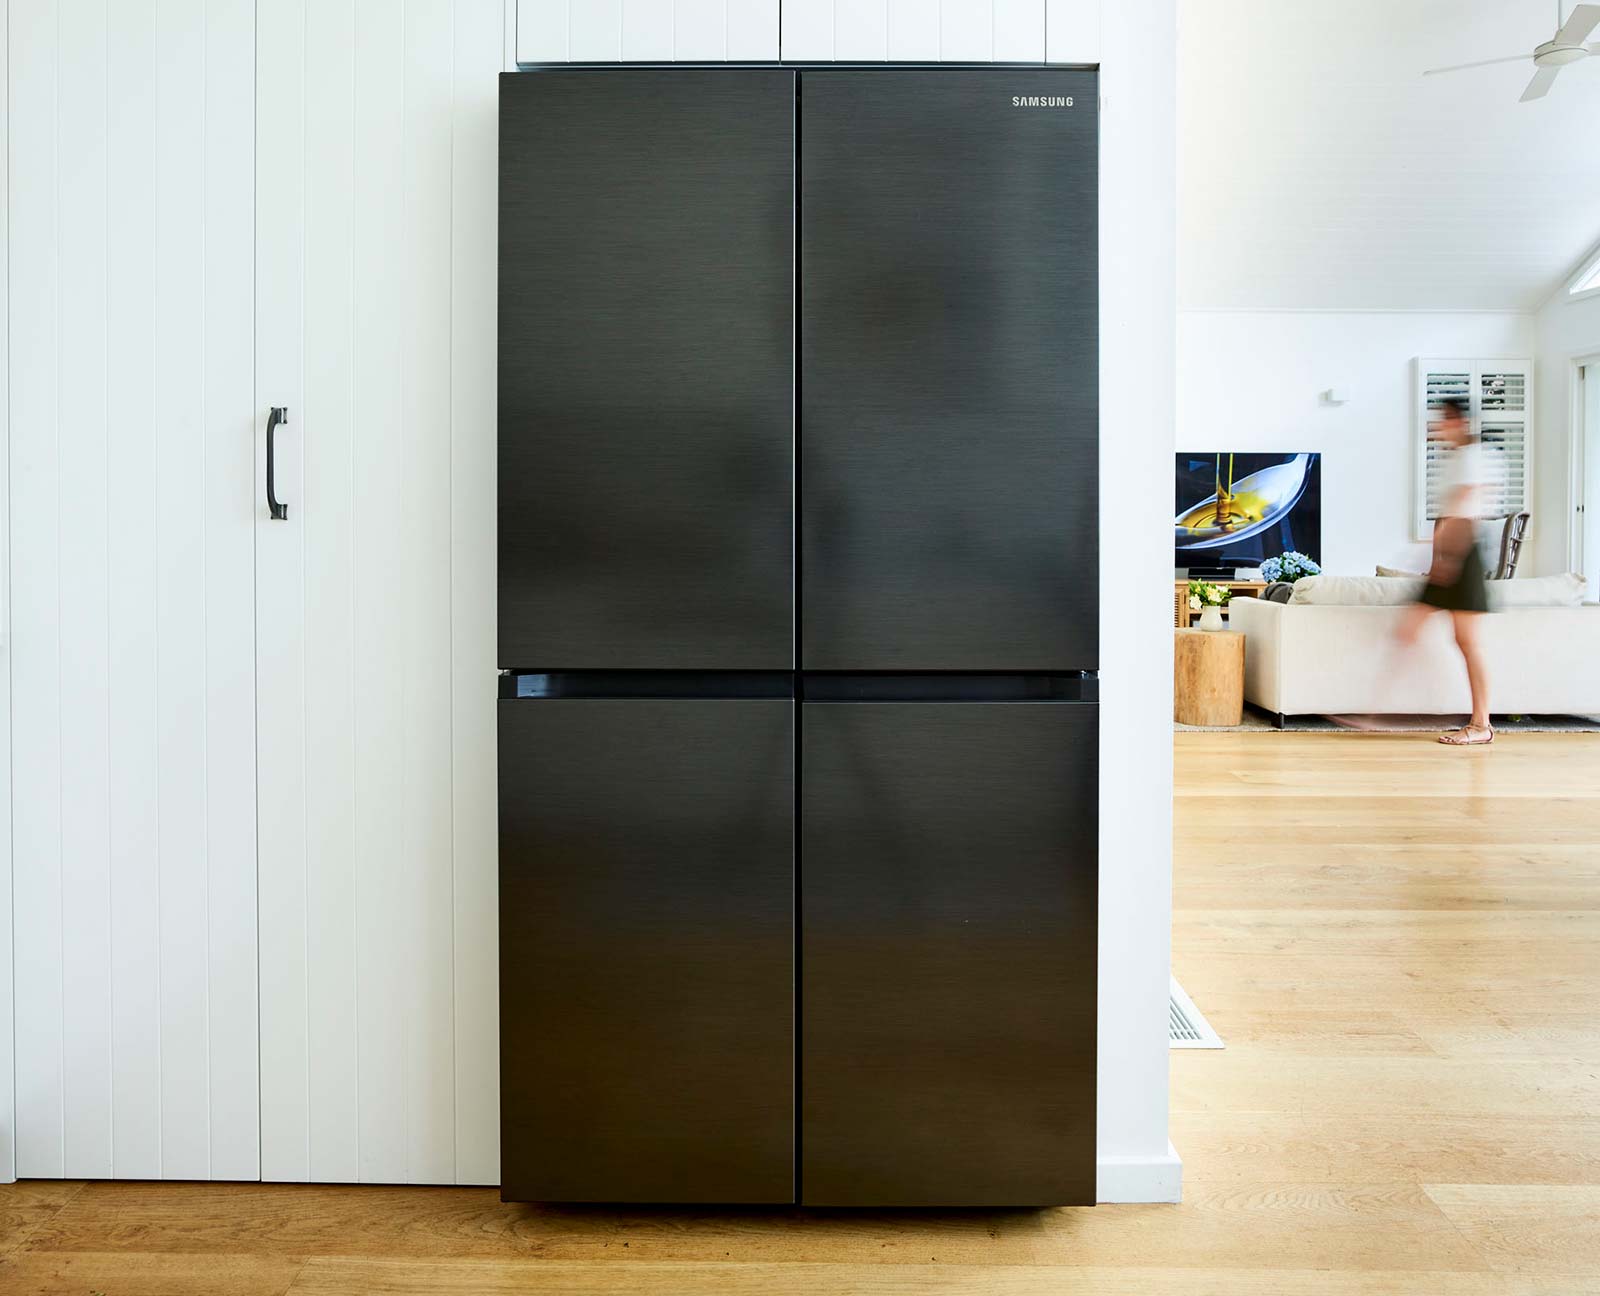 Samsung's 2021 French Door Refrigerator, shown at CES 2021